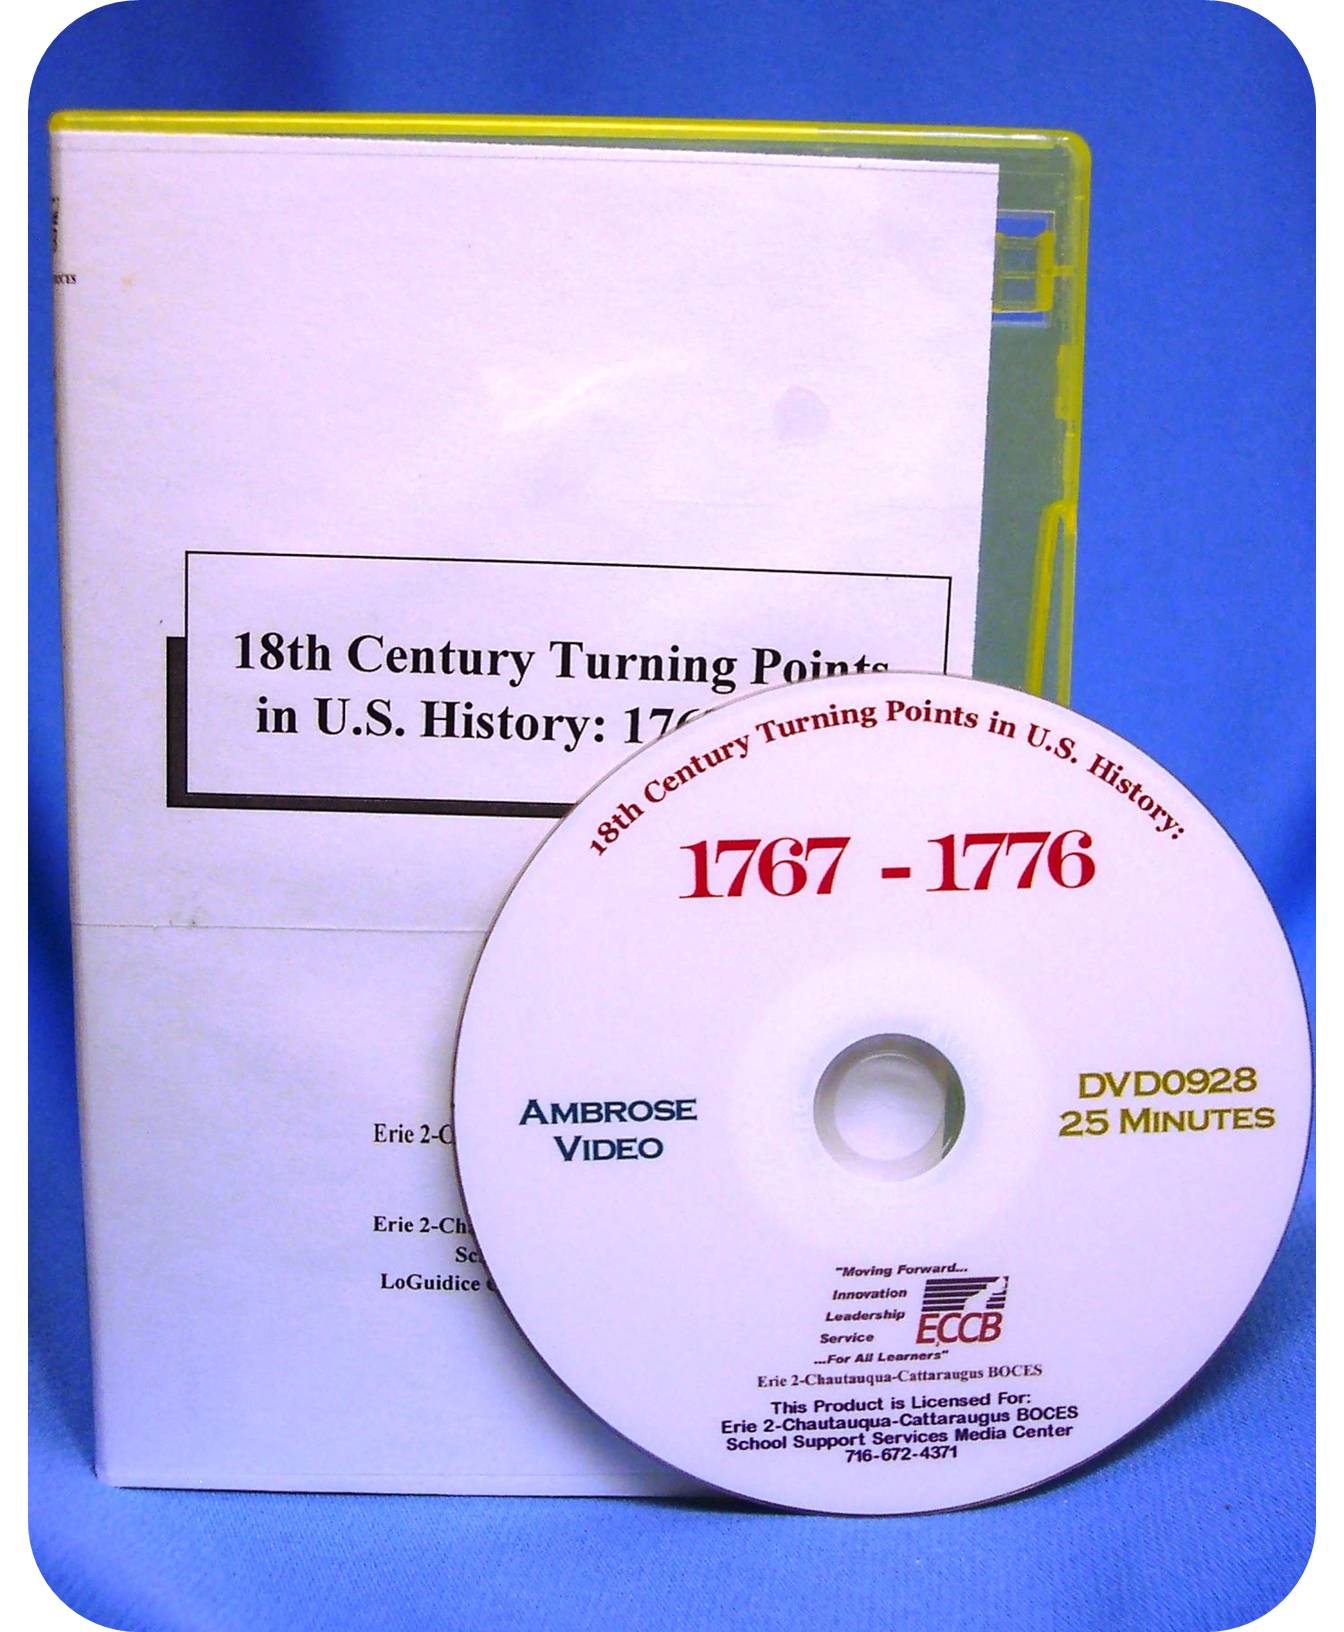 18th Century Turning Points in U.S. History: 1767- 1776